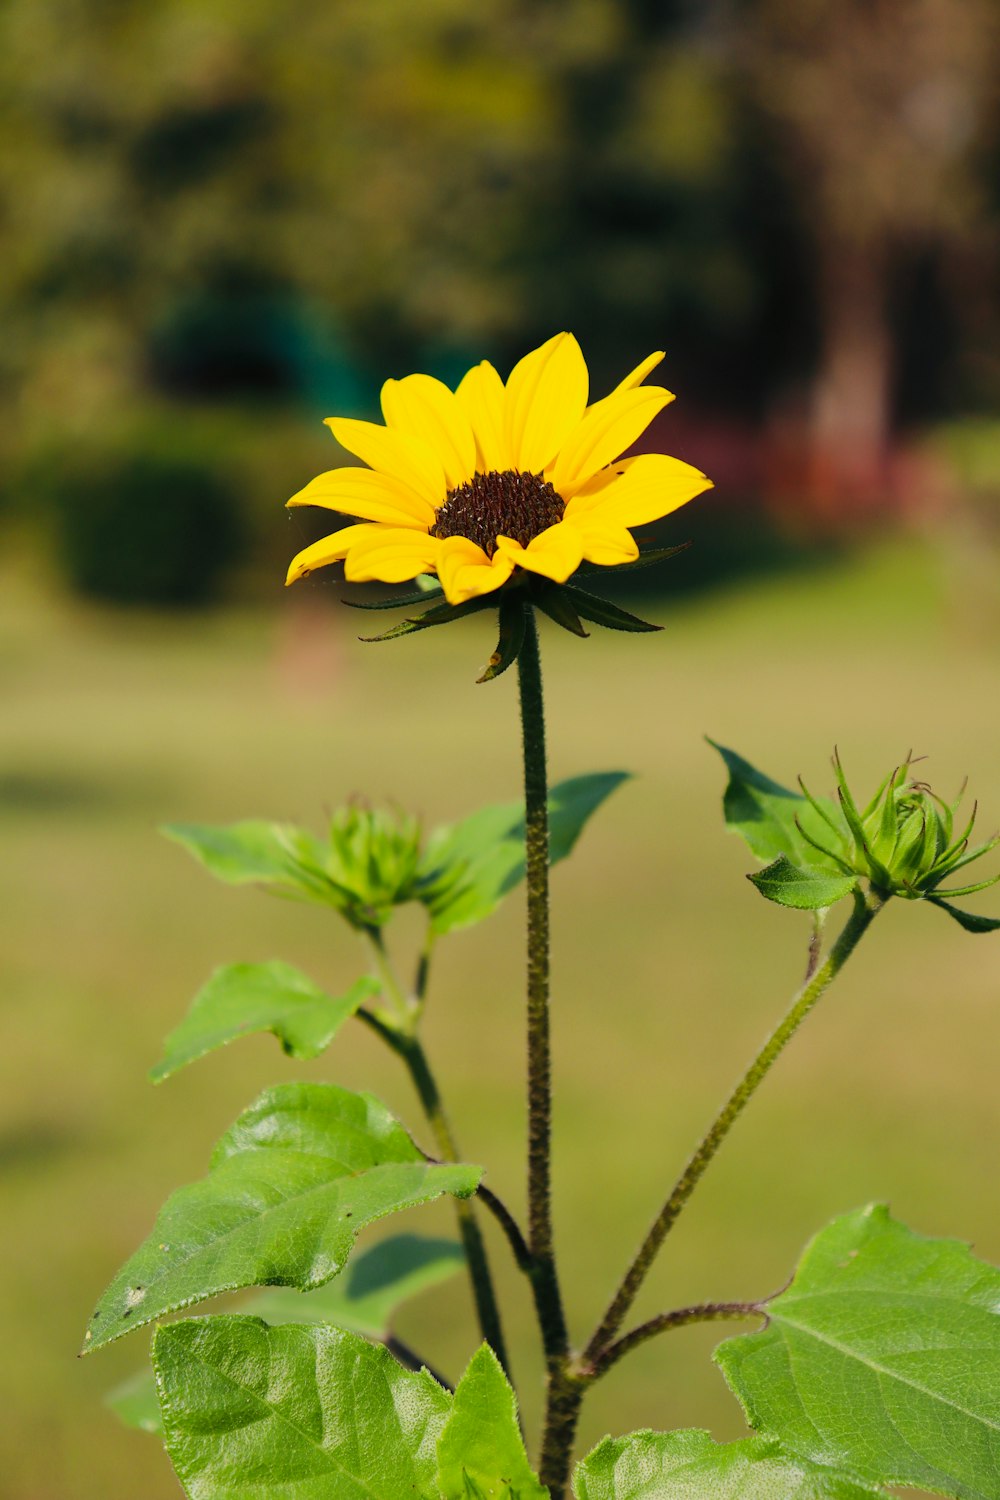 a yellow sunflower in a field with green leaves